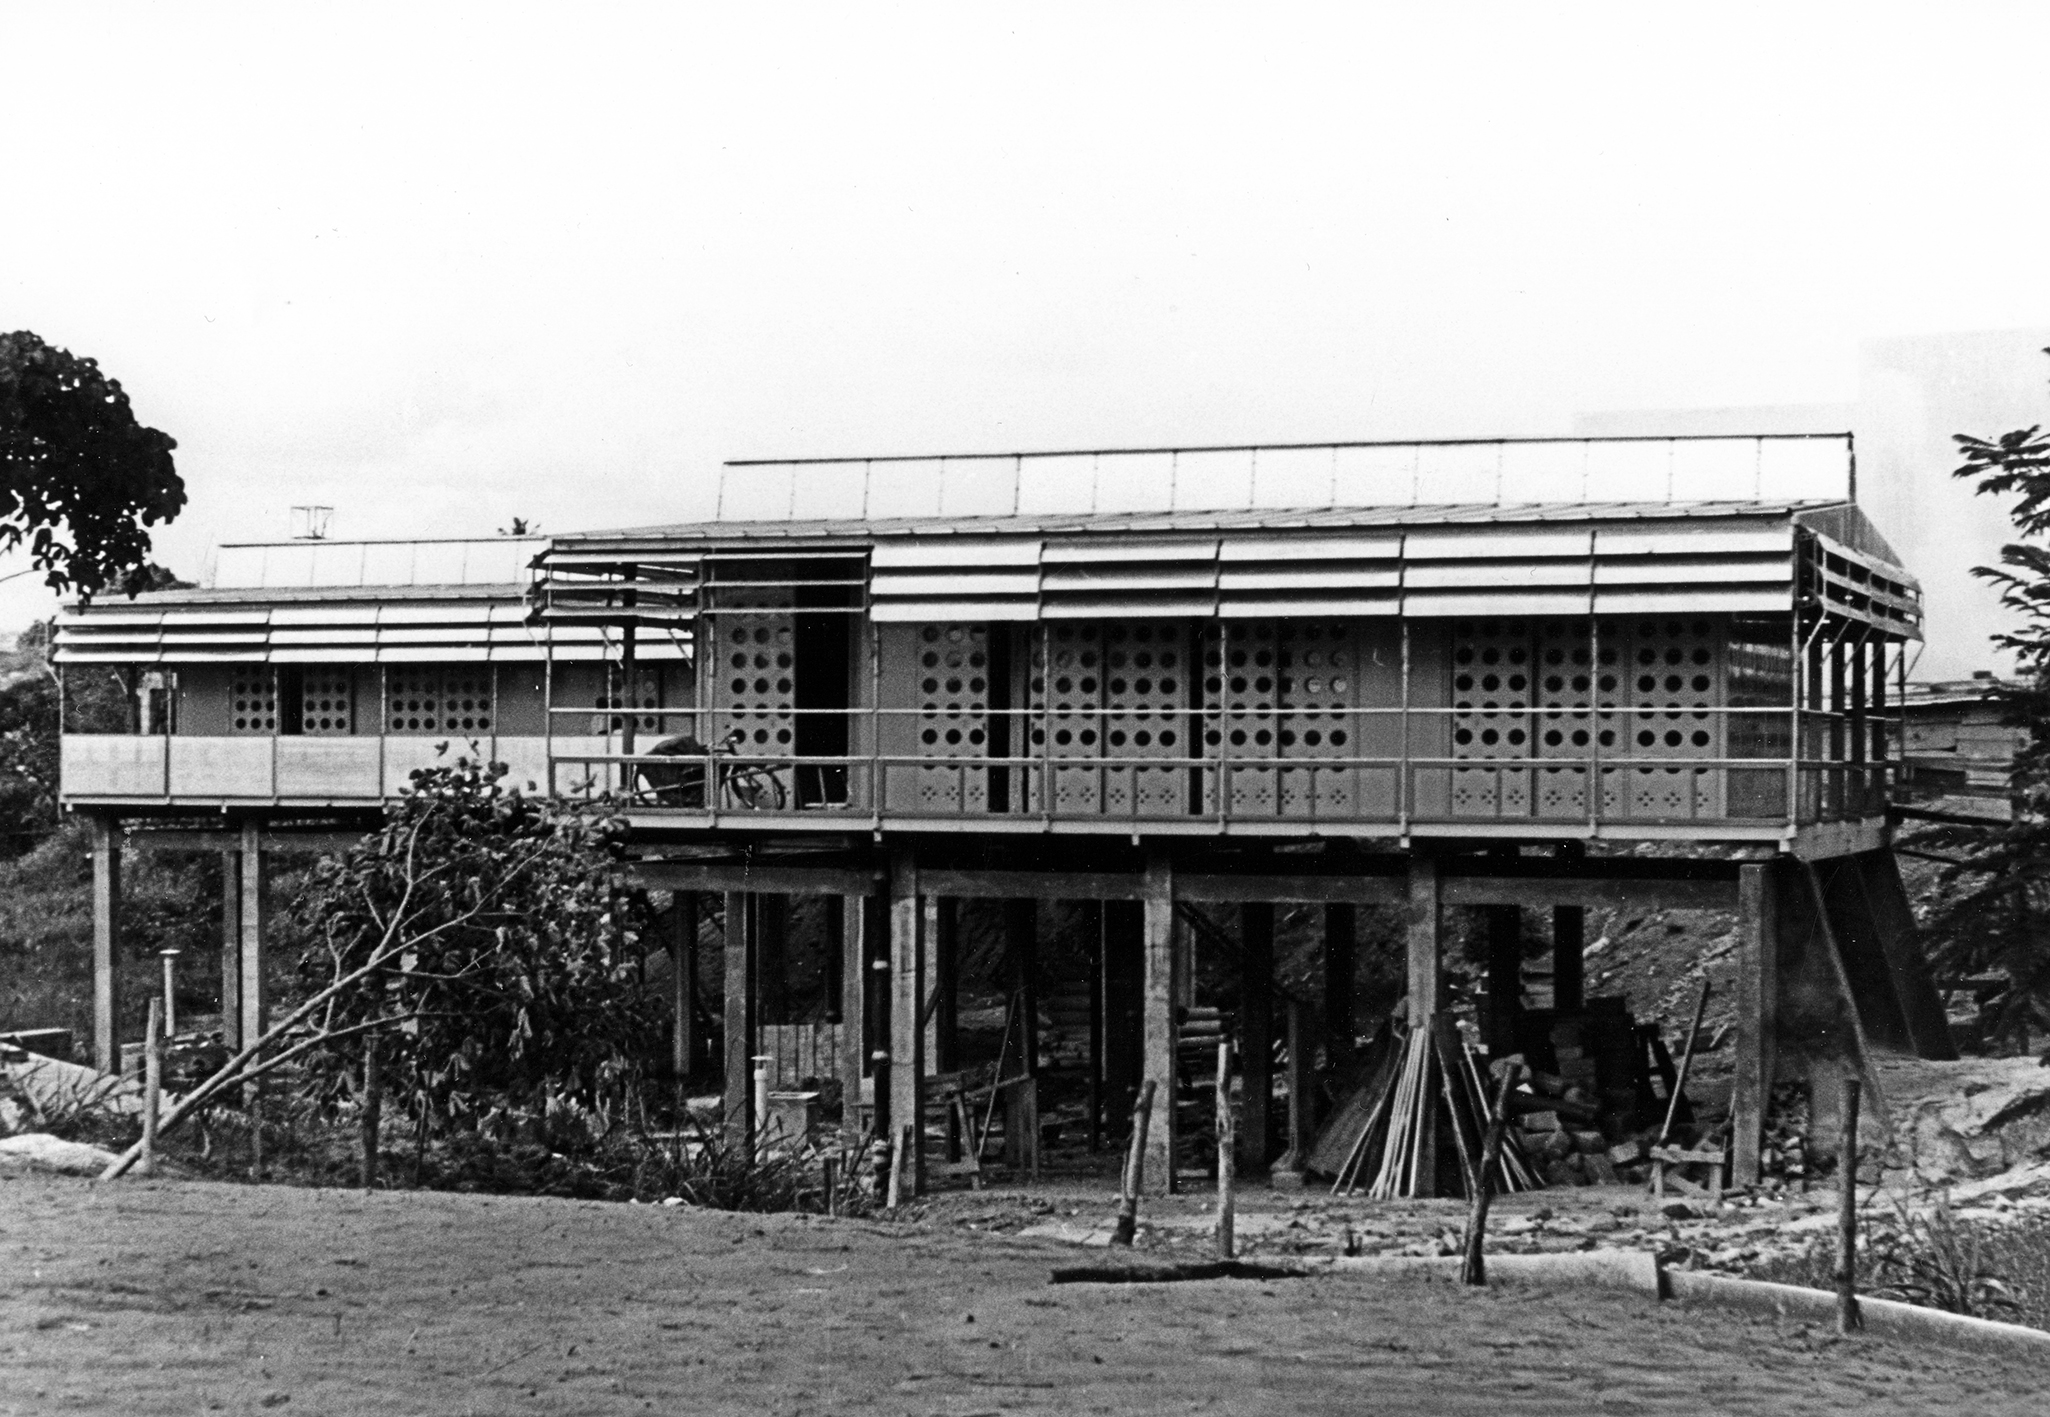 Tropique house in Brazzaville, 1951 (Henri Prouvé, arch.). Prefabricated housing and office on stilts with passageway.